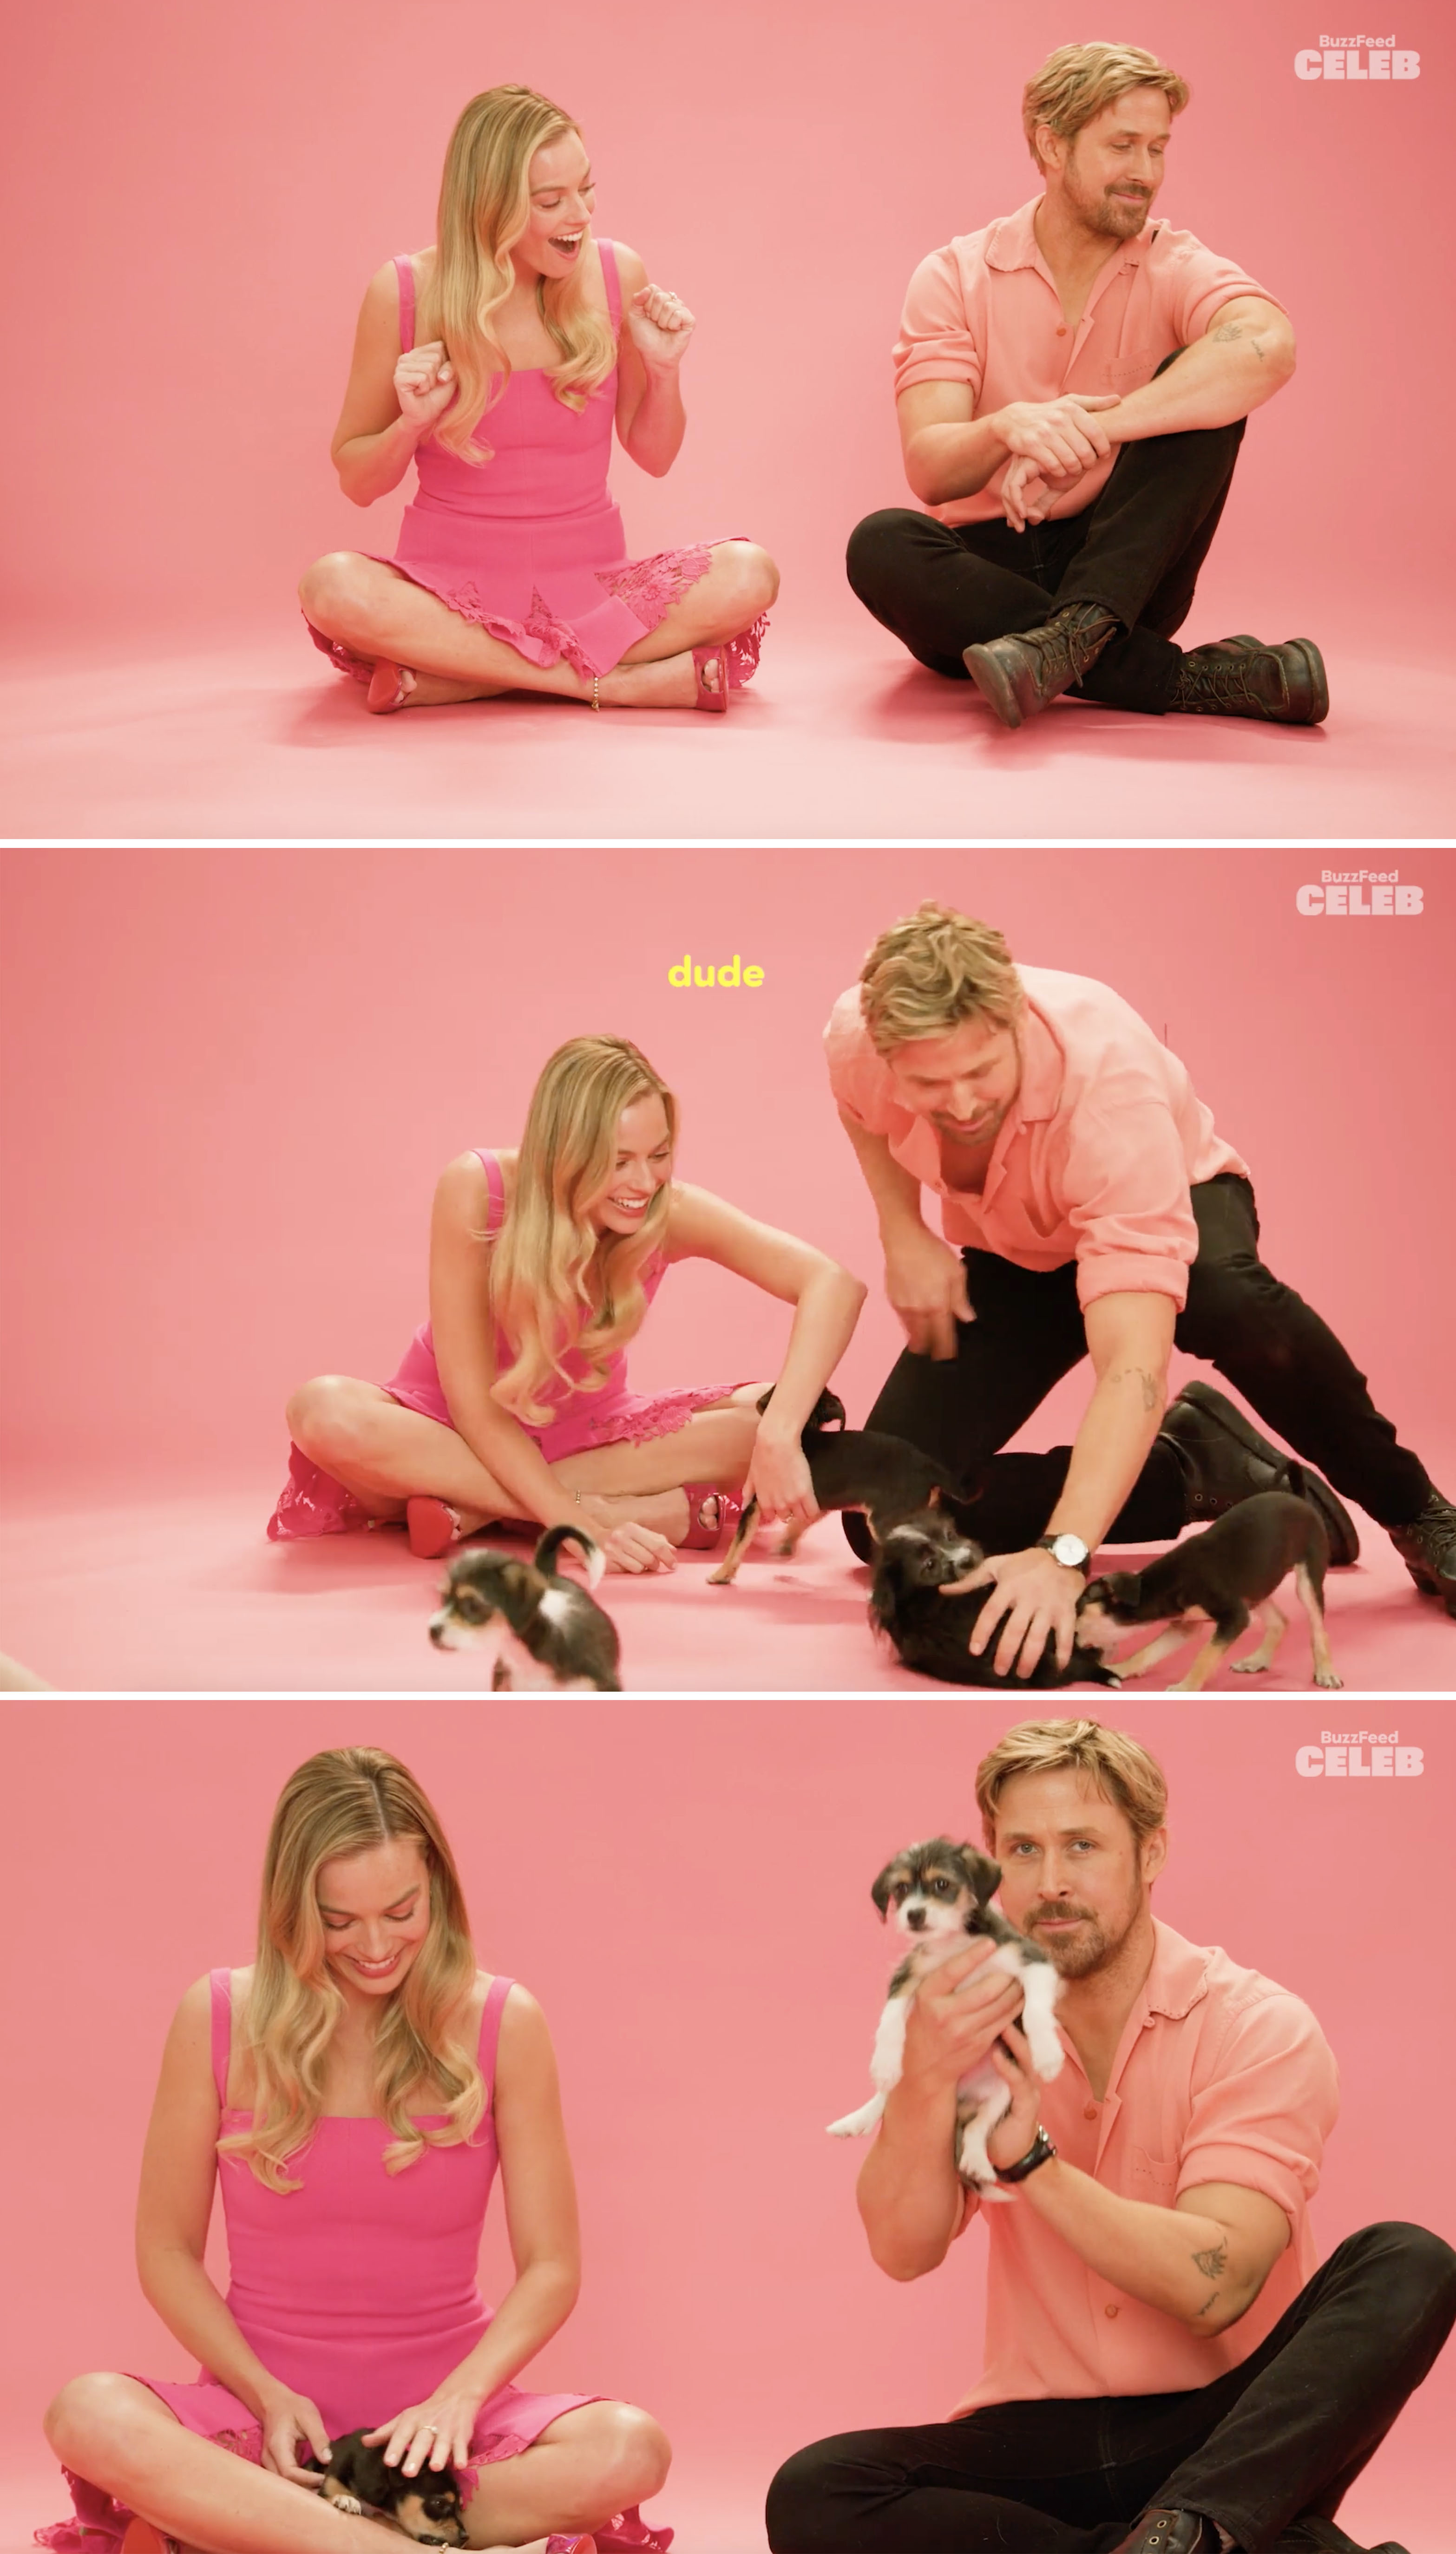 Margot and Ryan sitting and playing with puppies